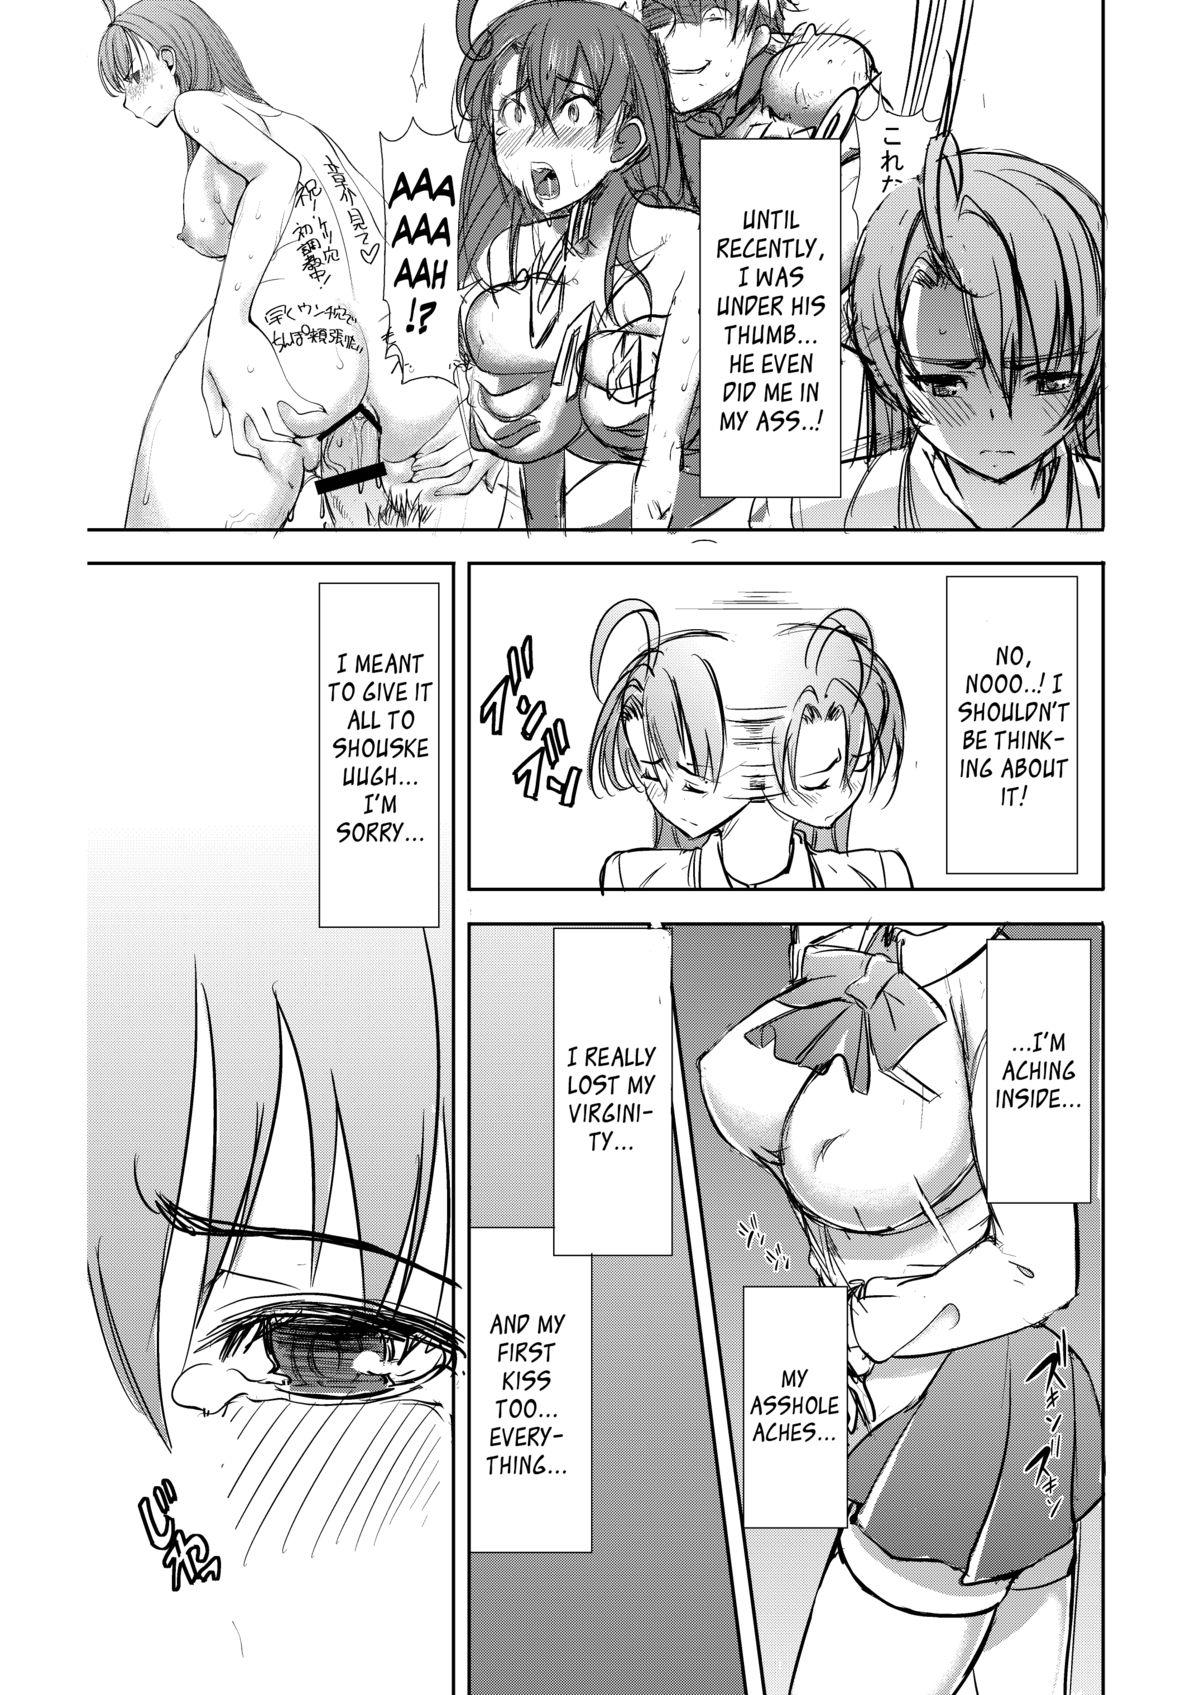 [Tanaka Aji] UnSweet Inoue Ai + (Plus) 2 Tainted by the guy I hate...  I have to hate it... Digital ver. vol.2 [English] 3